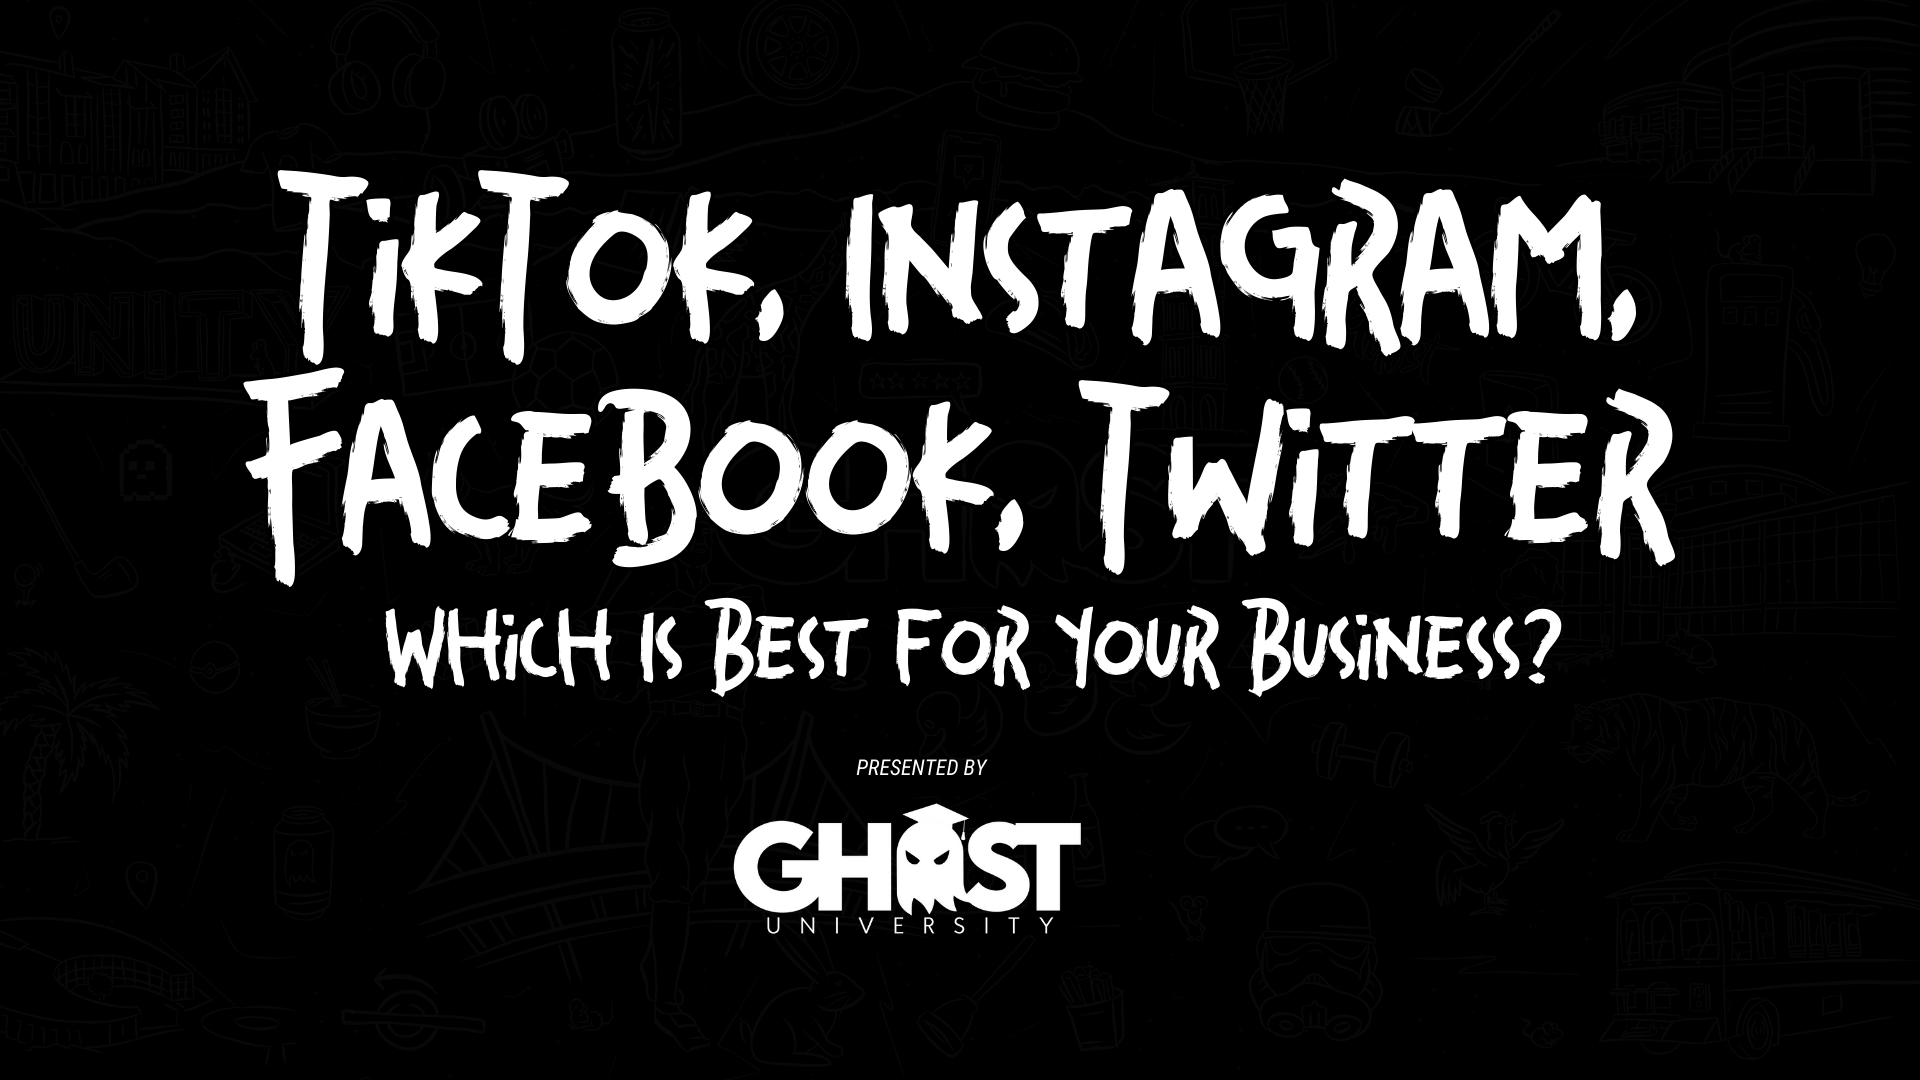 TikTok, Instagram, Facebook; Which Is Best for Your Business?